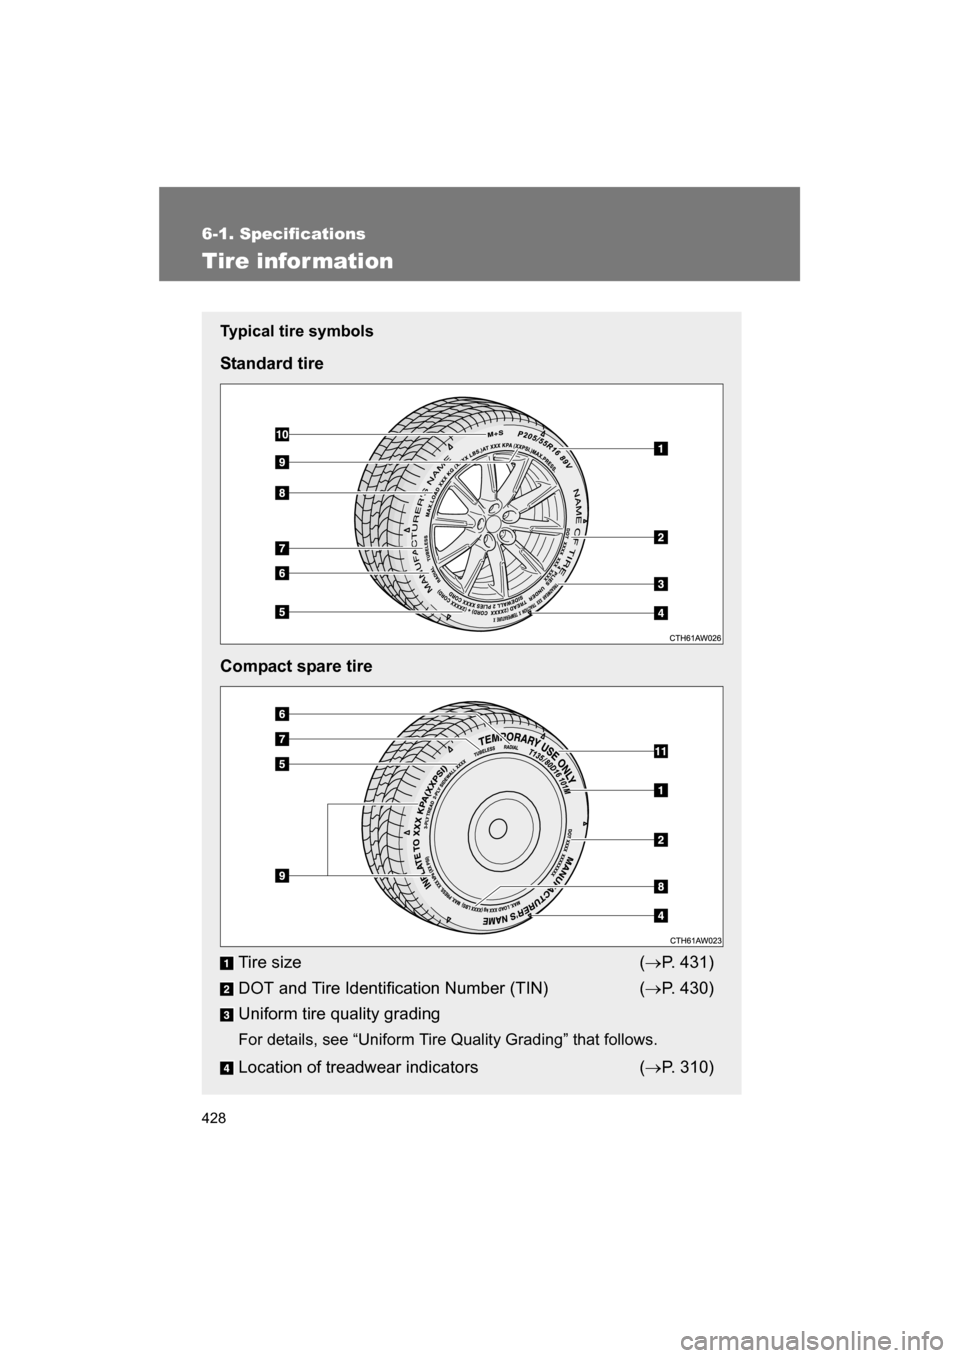 SUBARU BRZ 2014 1.G User Guide 428
6-1. Specifications
Tire information
Typical tire symbols 
Standard tire 
Compact spare tireTire size (→ P. 431)
DOT and Tire Identification Number (TIN) ( →P. 430)
Uniform tire quality gradin